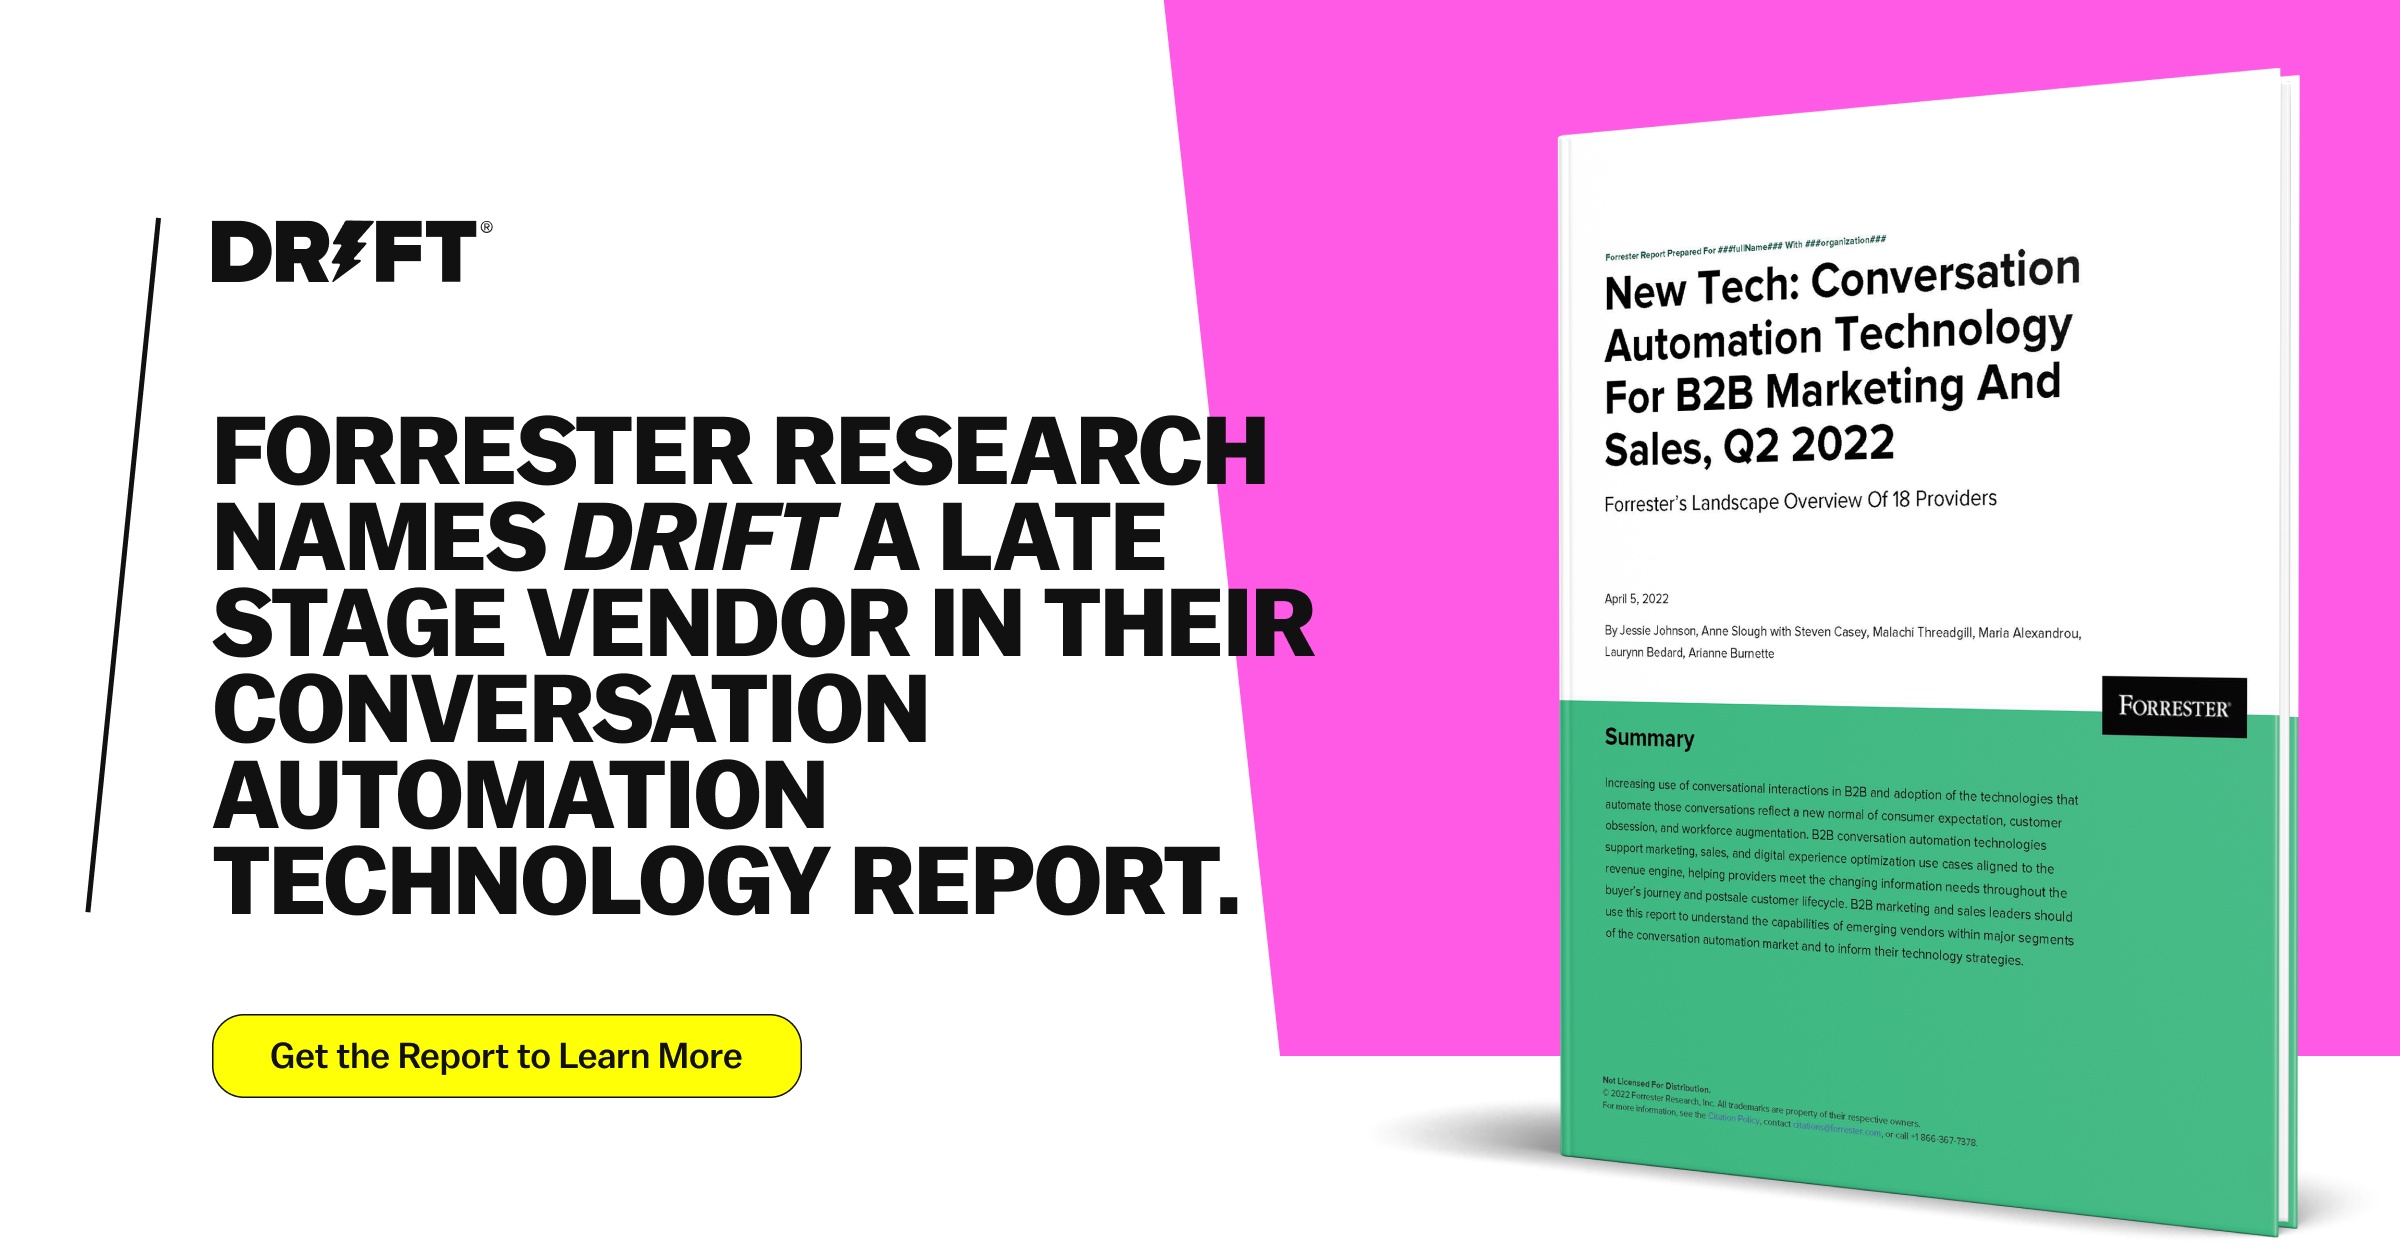 The results are in – Forrester Research names Drift a late stage vendor in their conversation automation technology report.